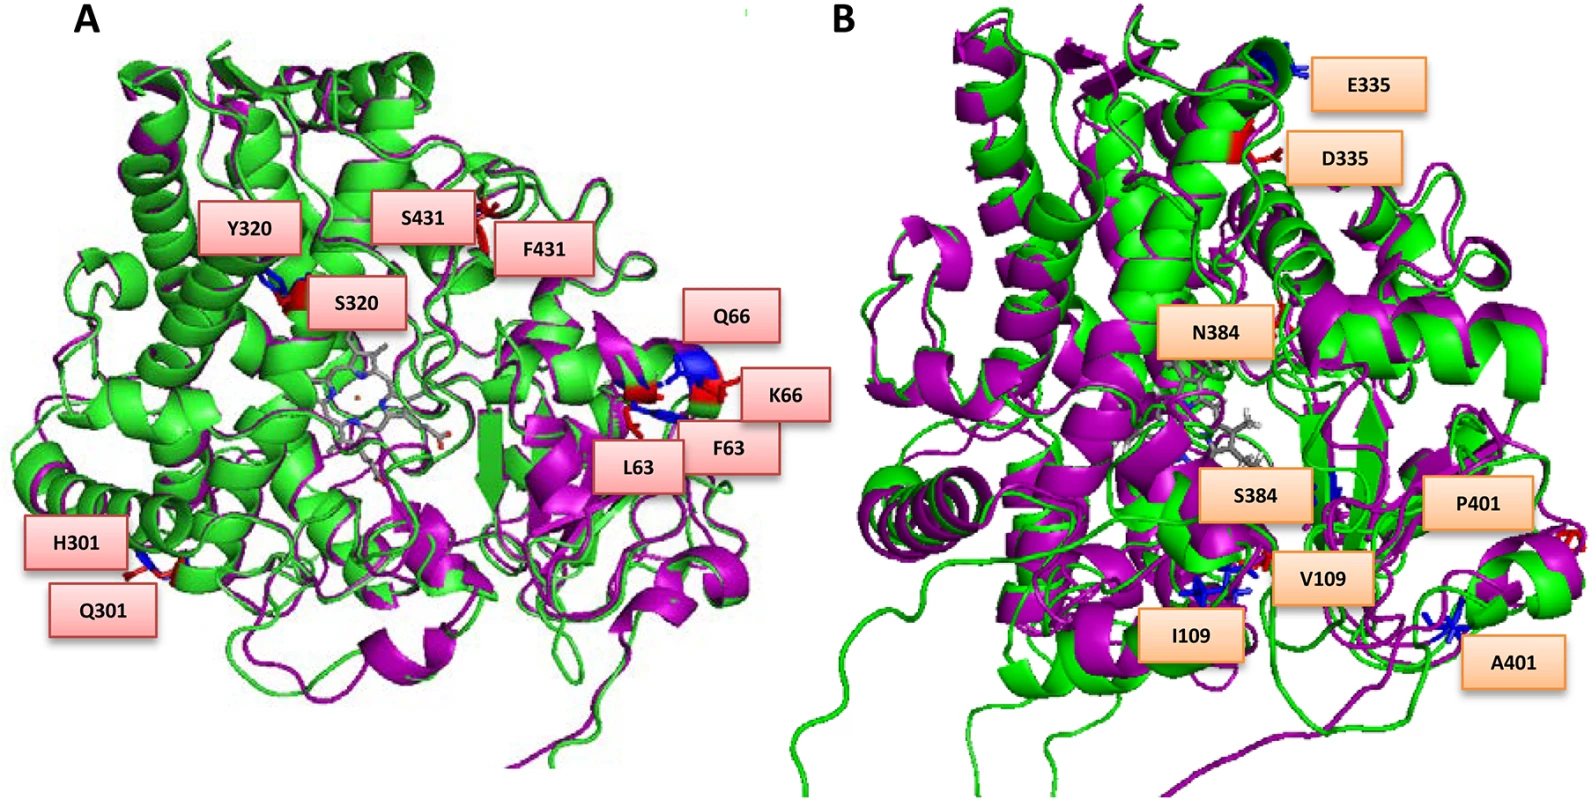 Overlay of (A) MALCYP6P9a (green helices) and FANGCYP6P9a (purple helices) and (B) MALCYP6P9b (green helices) and FANGCYP6P9b (purple helices) showing amino acid residues changes.